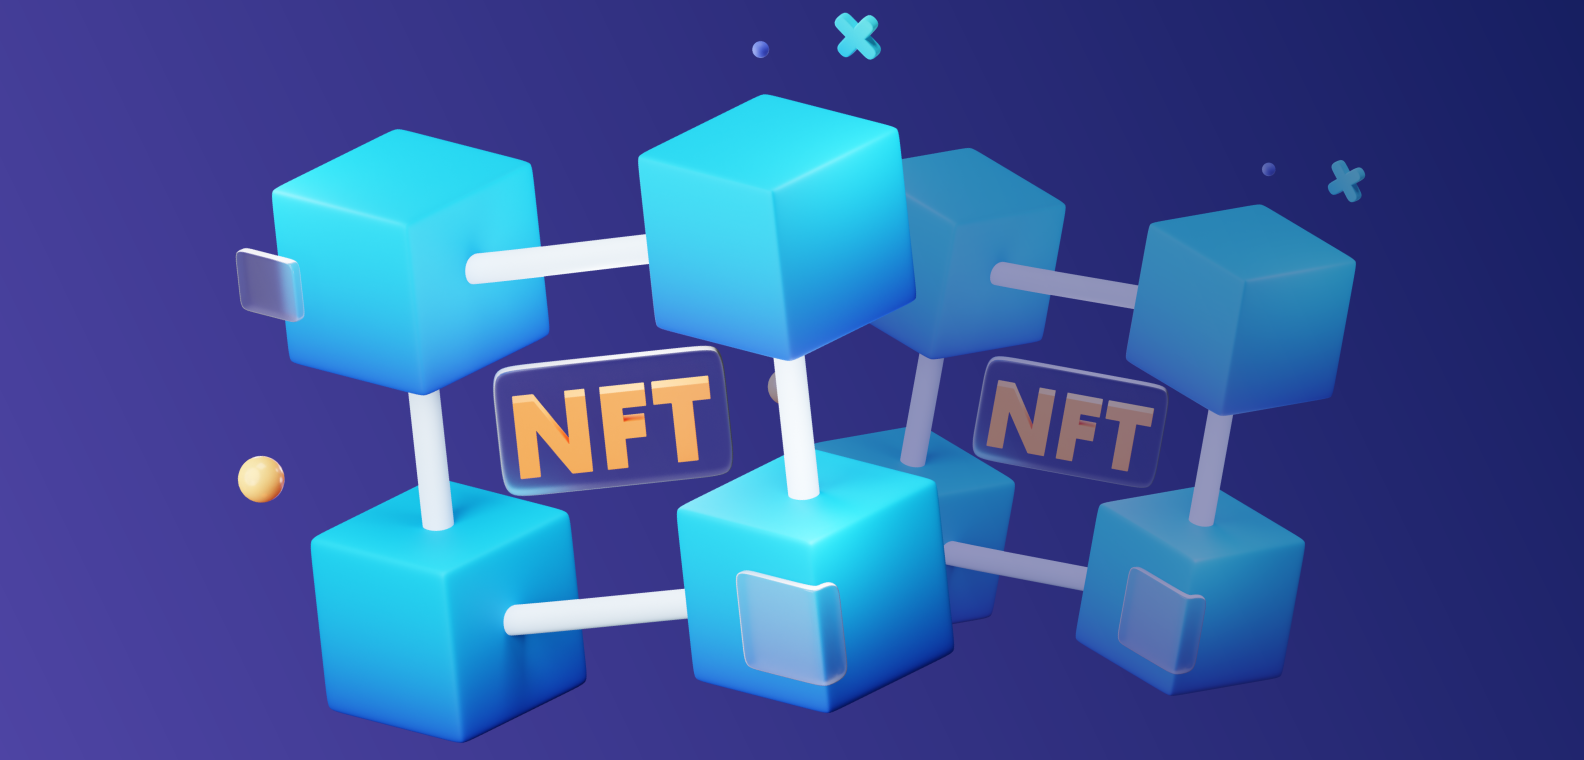 The Importance Of Cross-Chain NFT Technology